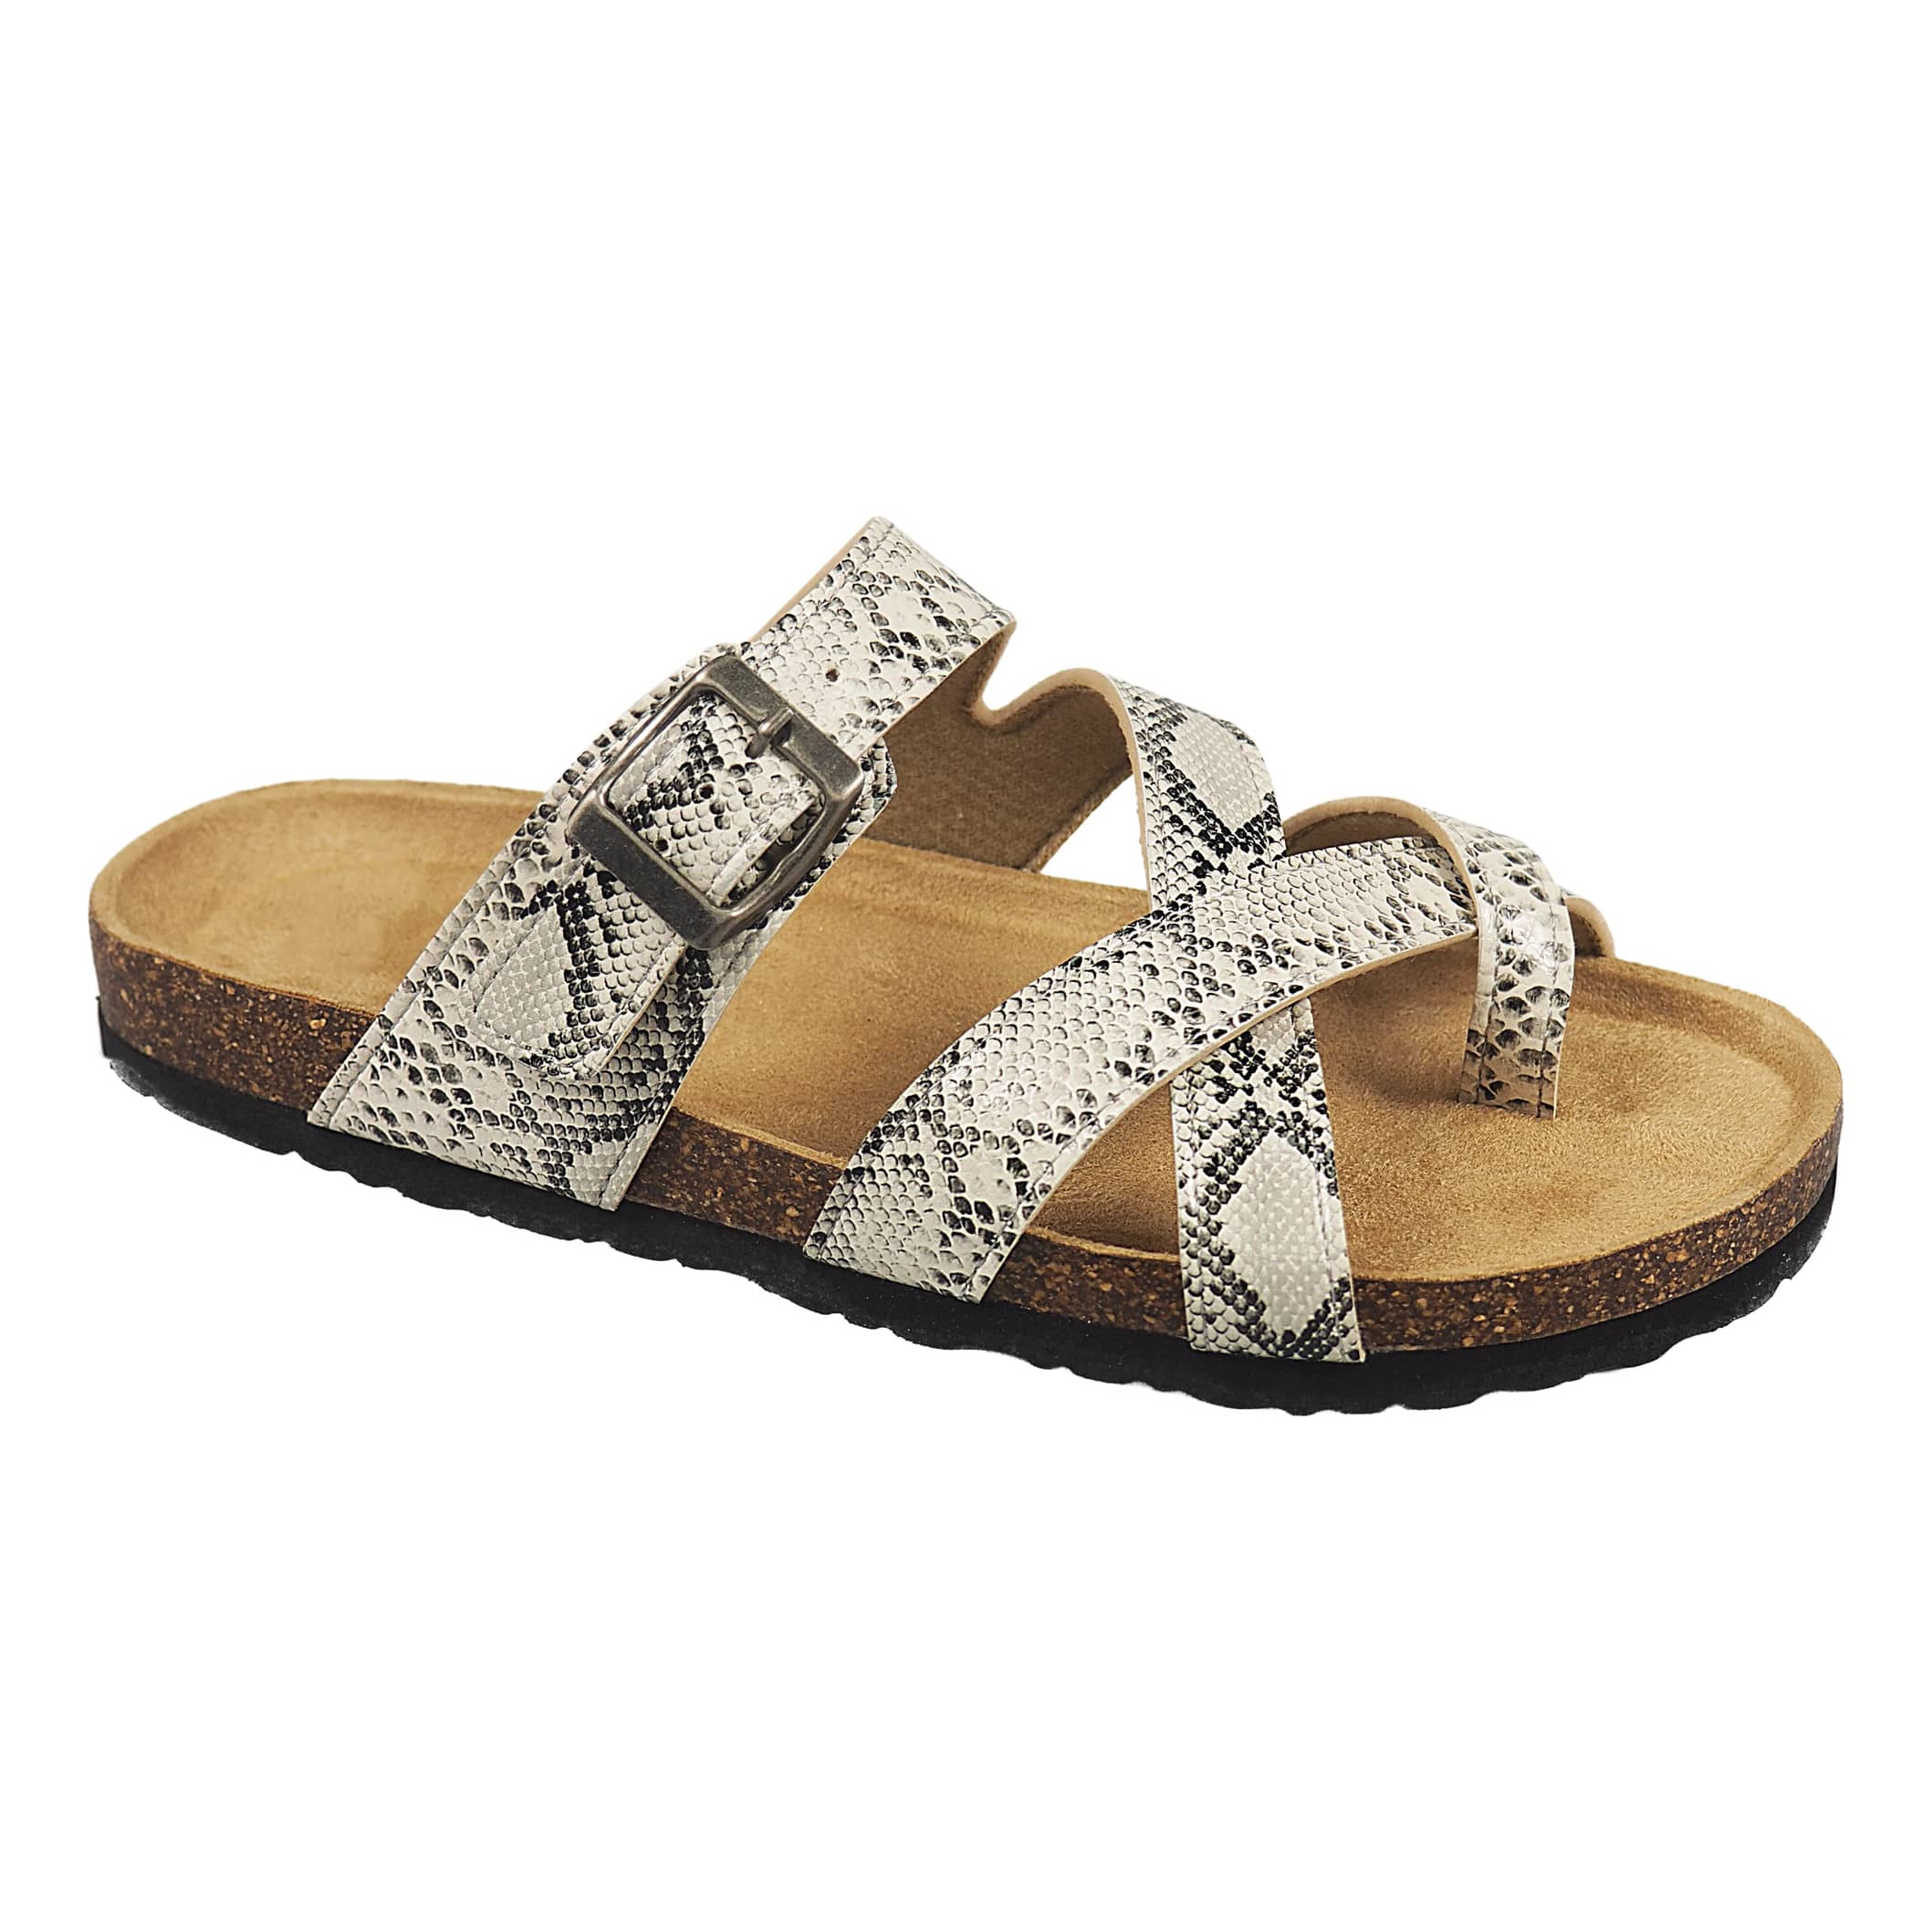 Natural Reflections® Women’s Leanna Buckle Sandals